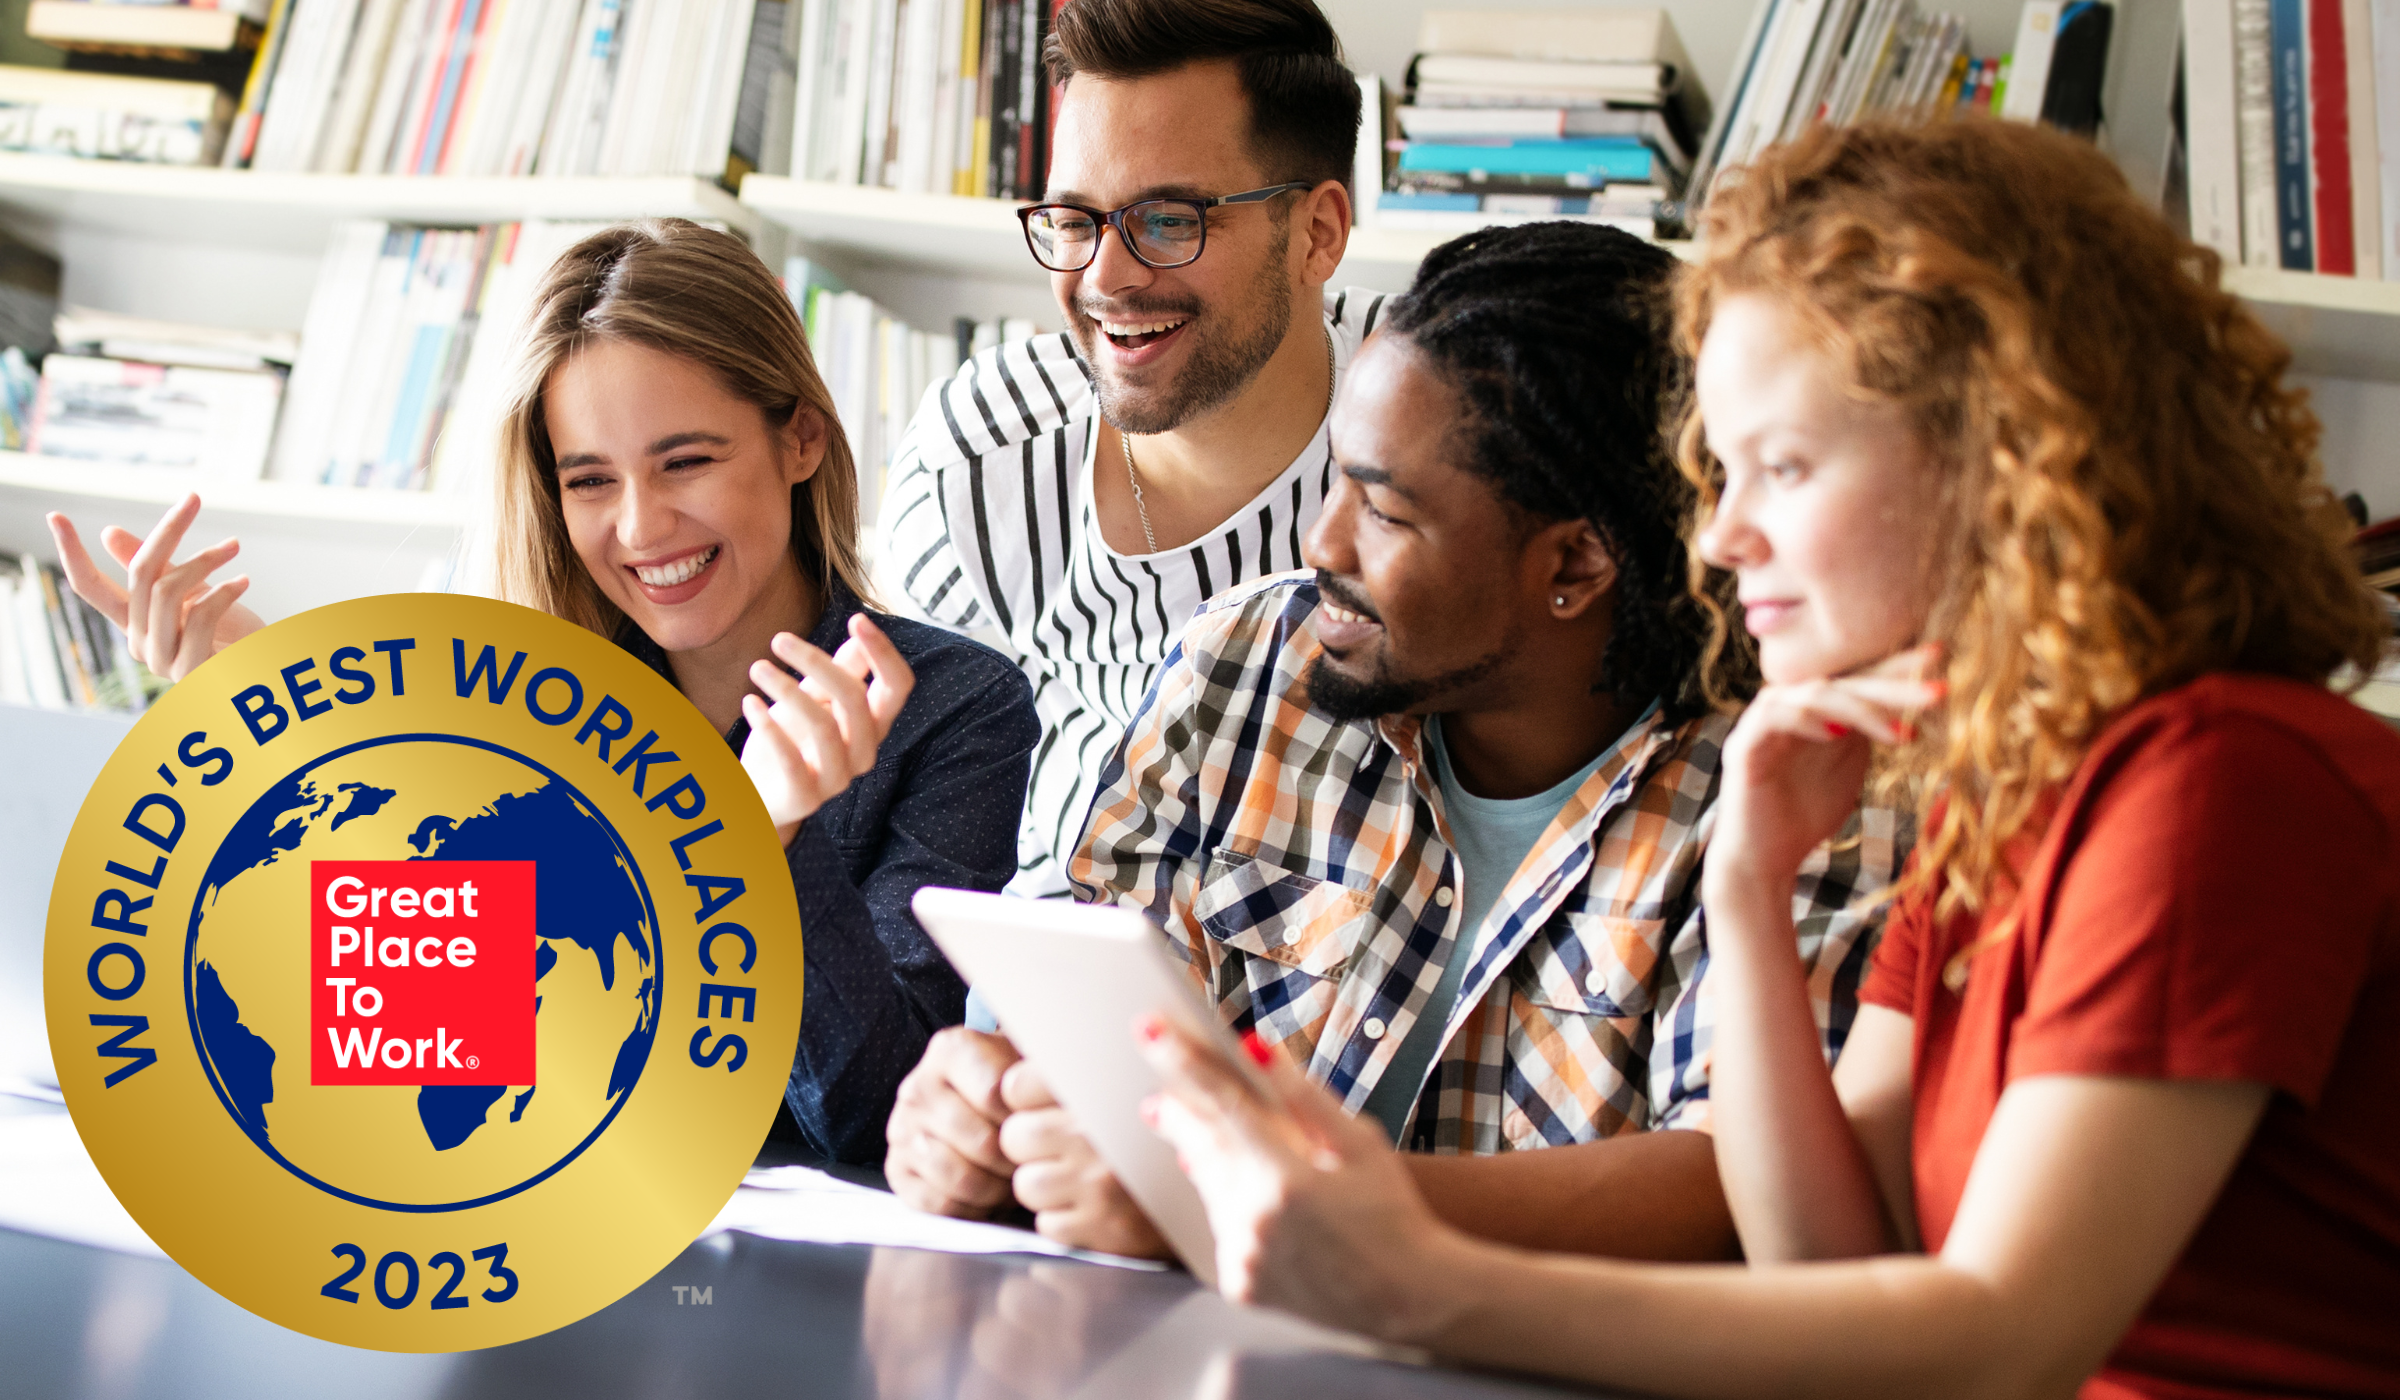 Investing In Your Employees: Inside The World's Best Workplaces 2023